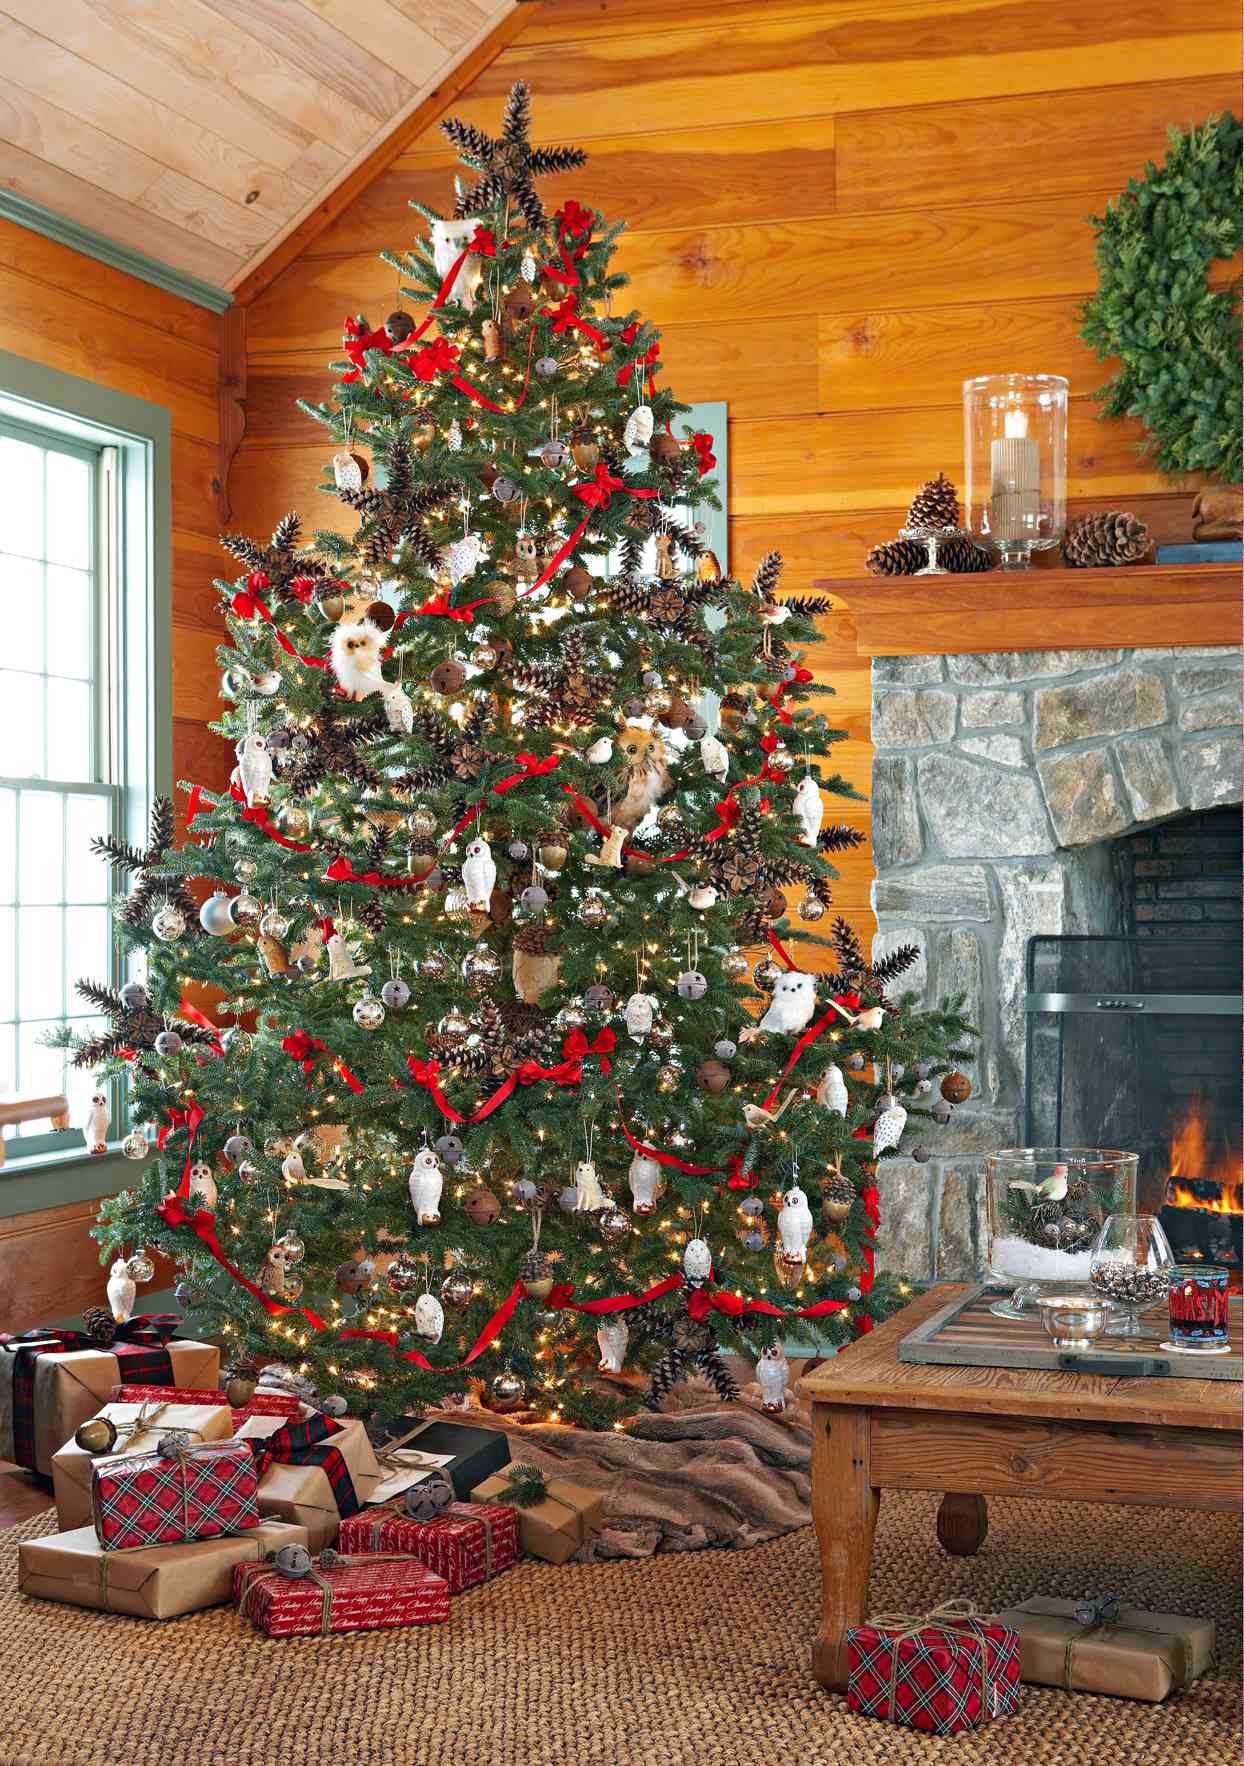 Rustic Christmas Tree Topper Ideas : While we love this inspiring tree ...